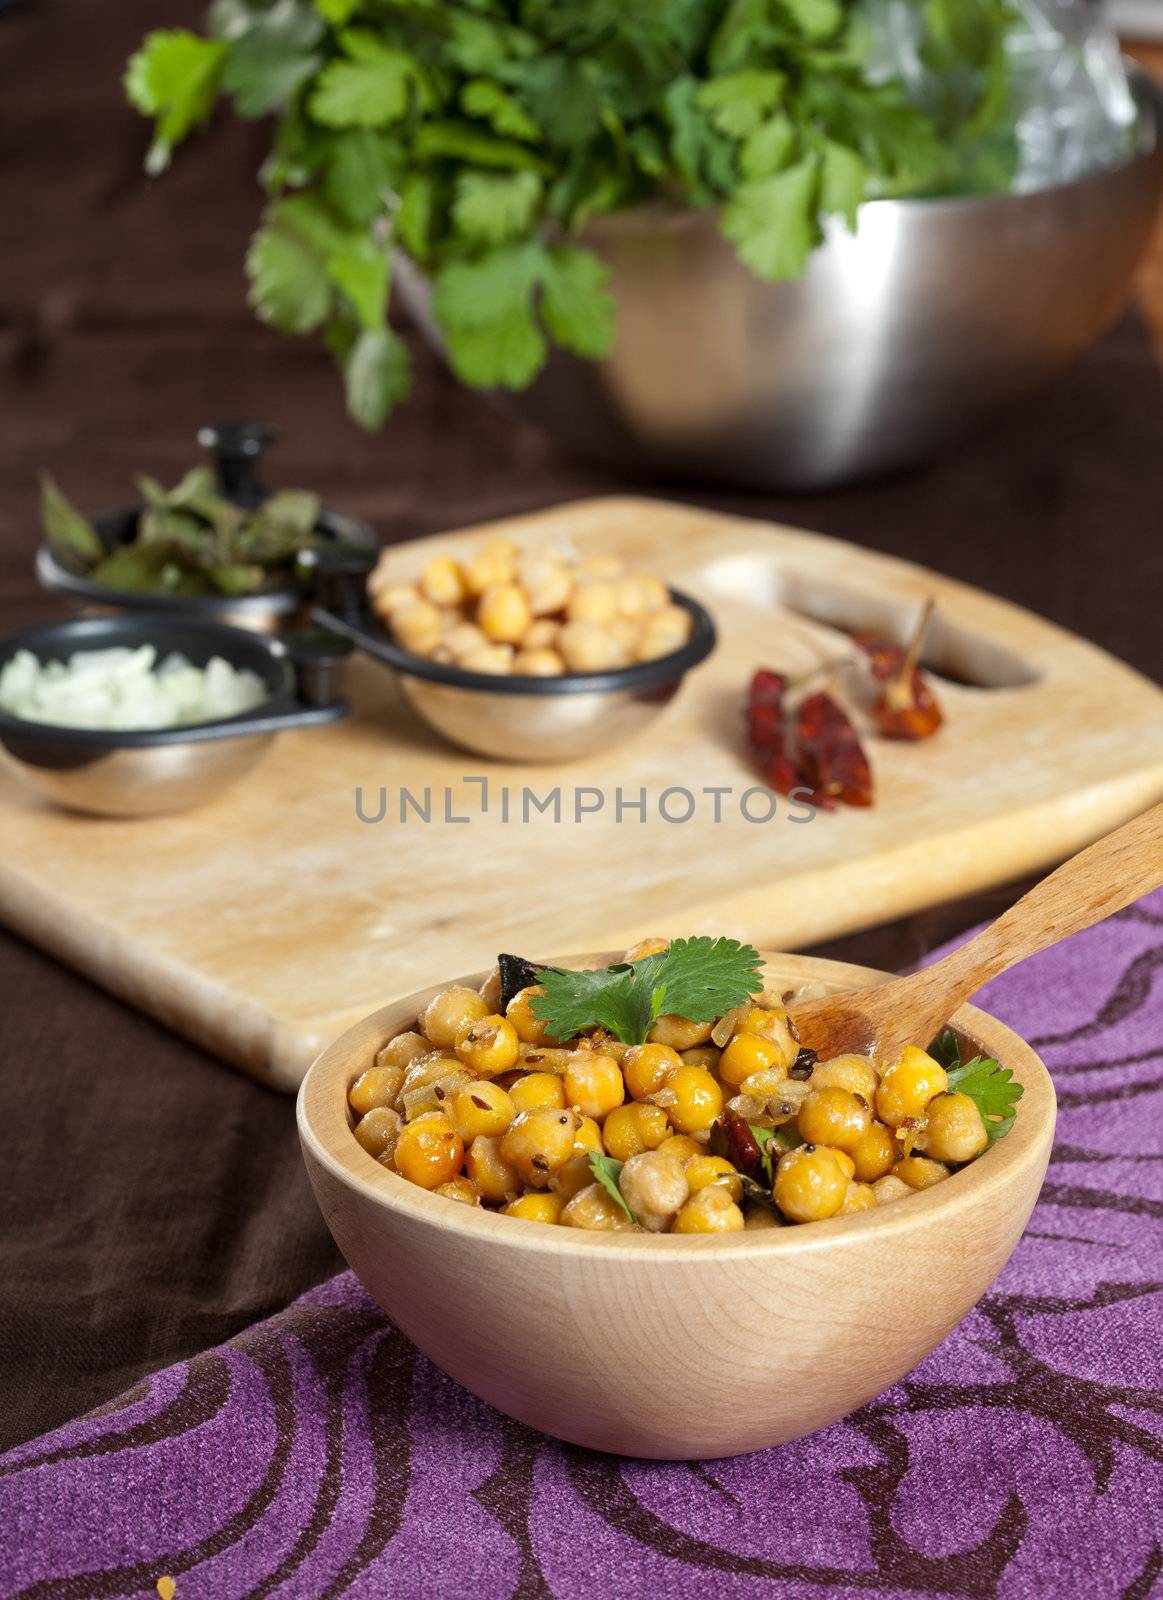 Delicious appetizer with chickpeas and cilantro